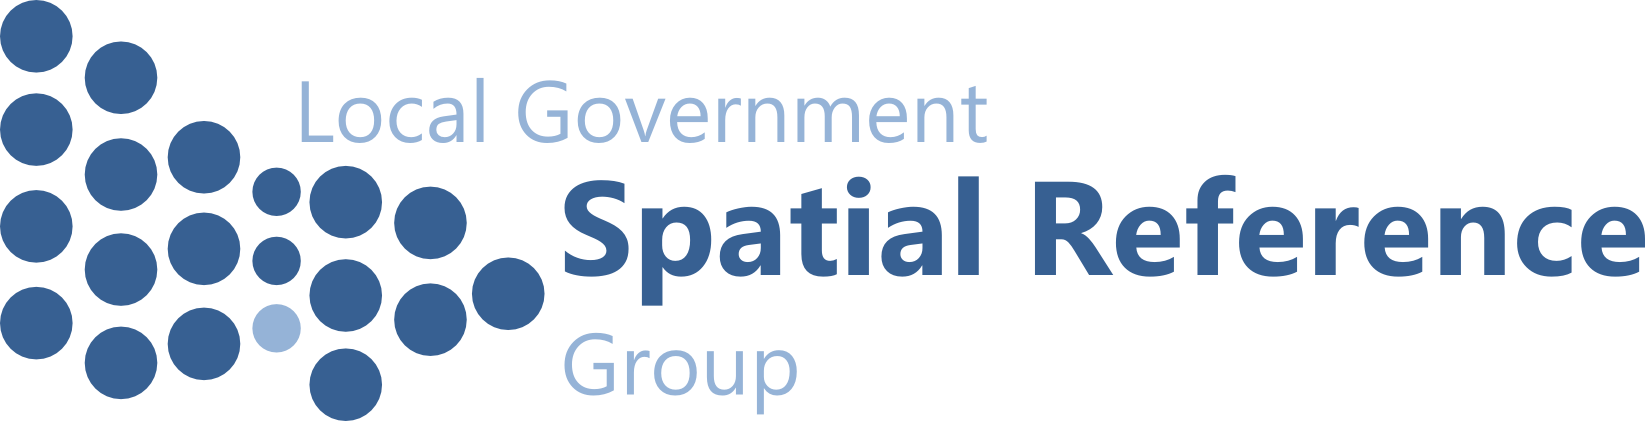 Local Government Spatial Reference Group logo